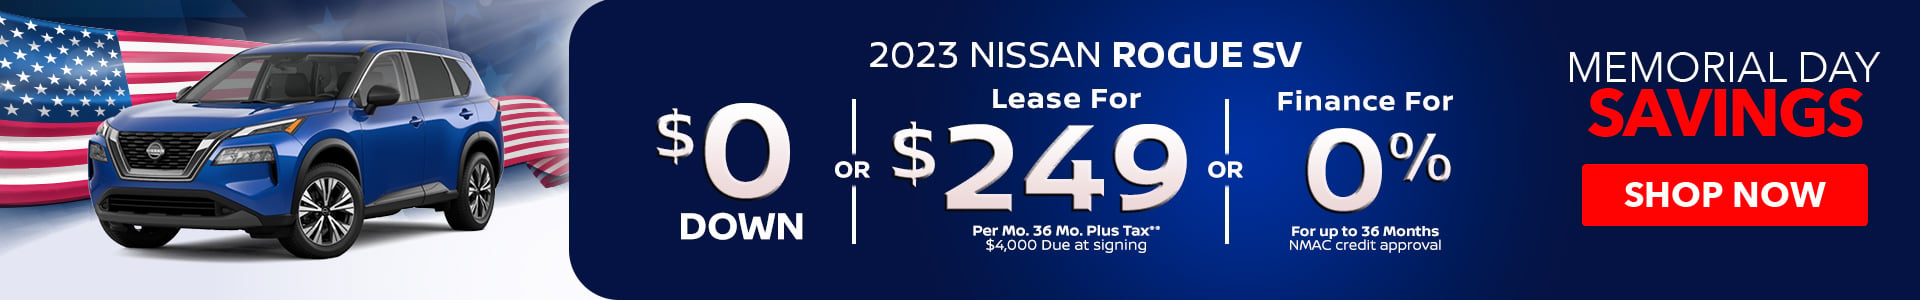 2023 Nissan Rogue - Lease for $249